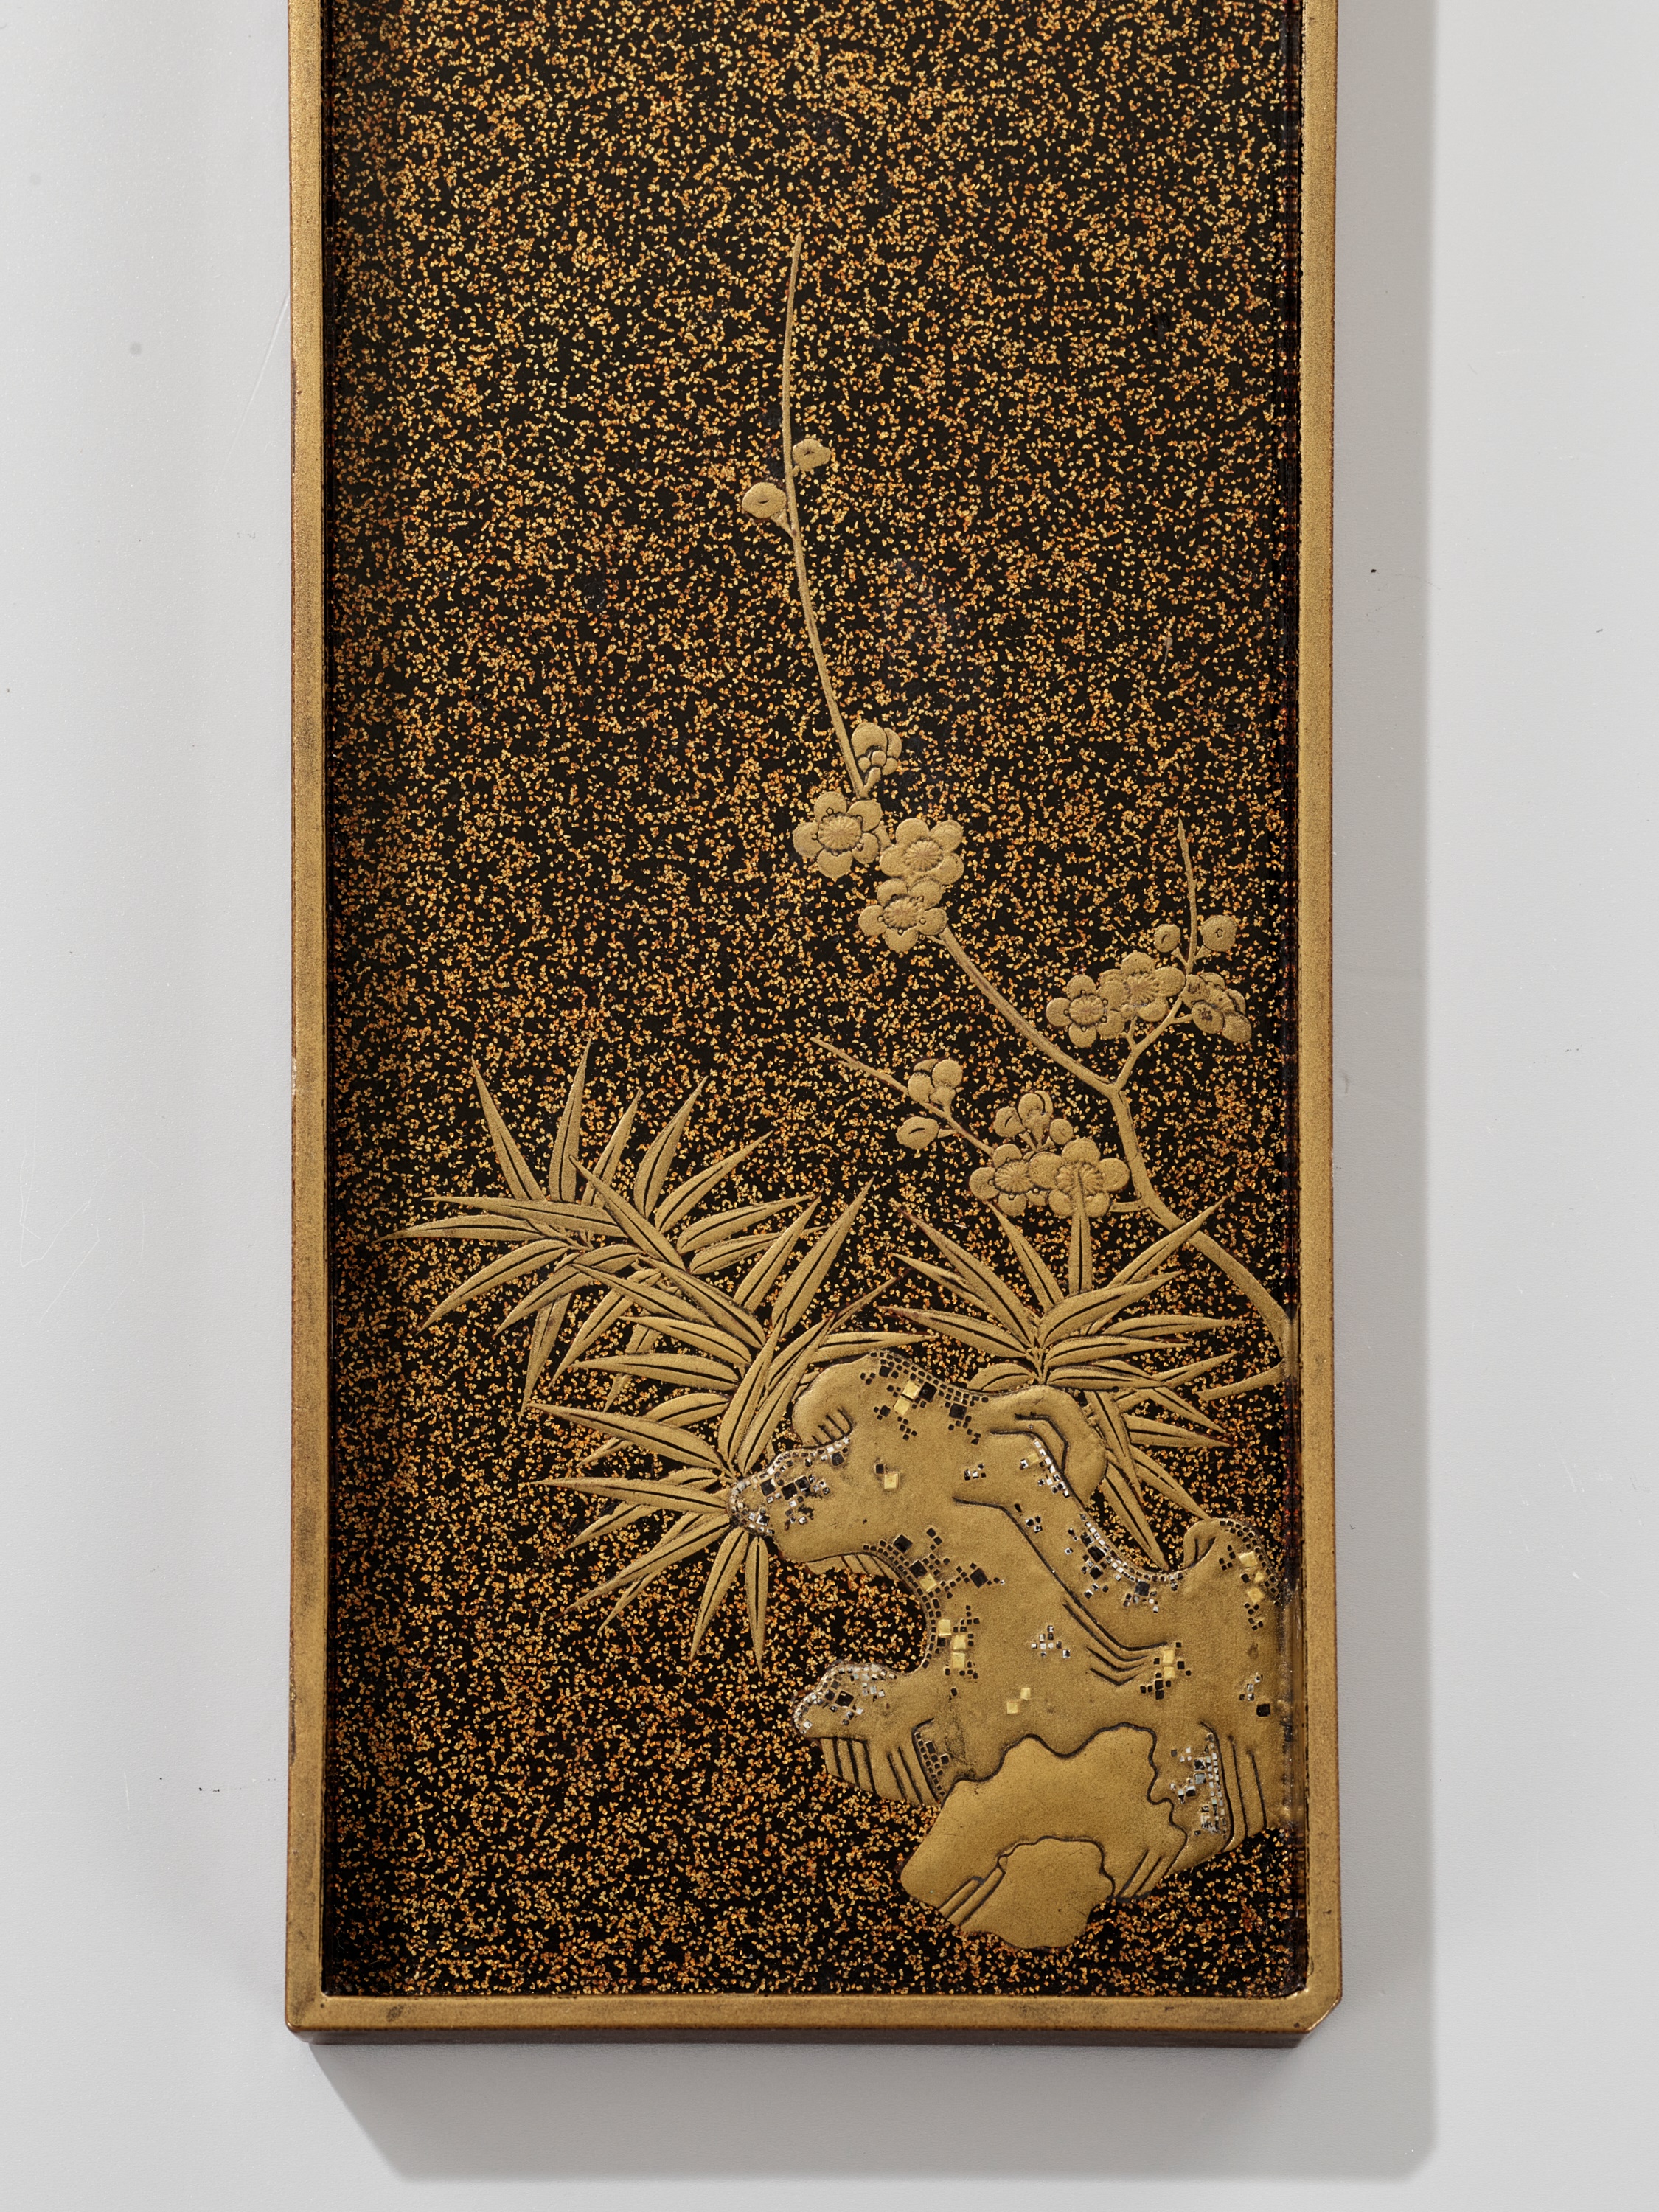 A FINE AND RARE GOLD LACQUER SUZURIBAKO DEPICTING A DRAGON, TIGERS, AND A LEOPARD (FEMALE TIGER) - Image 5 of 12